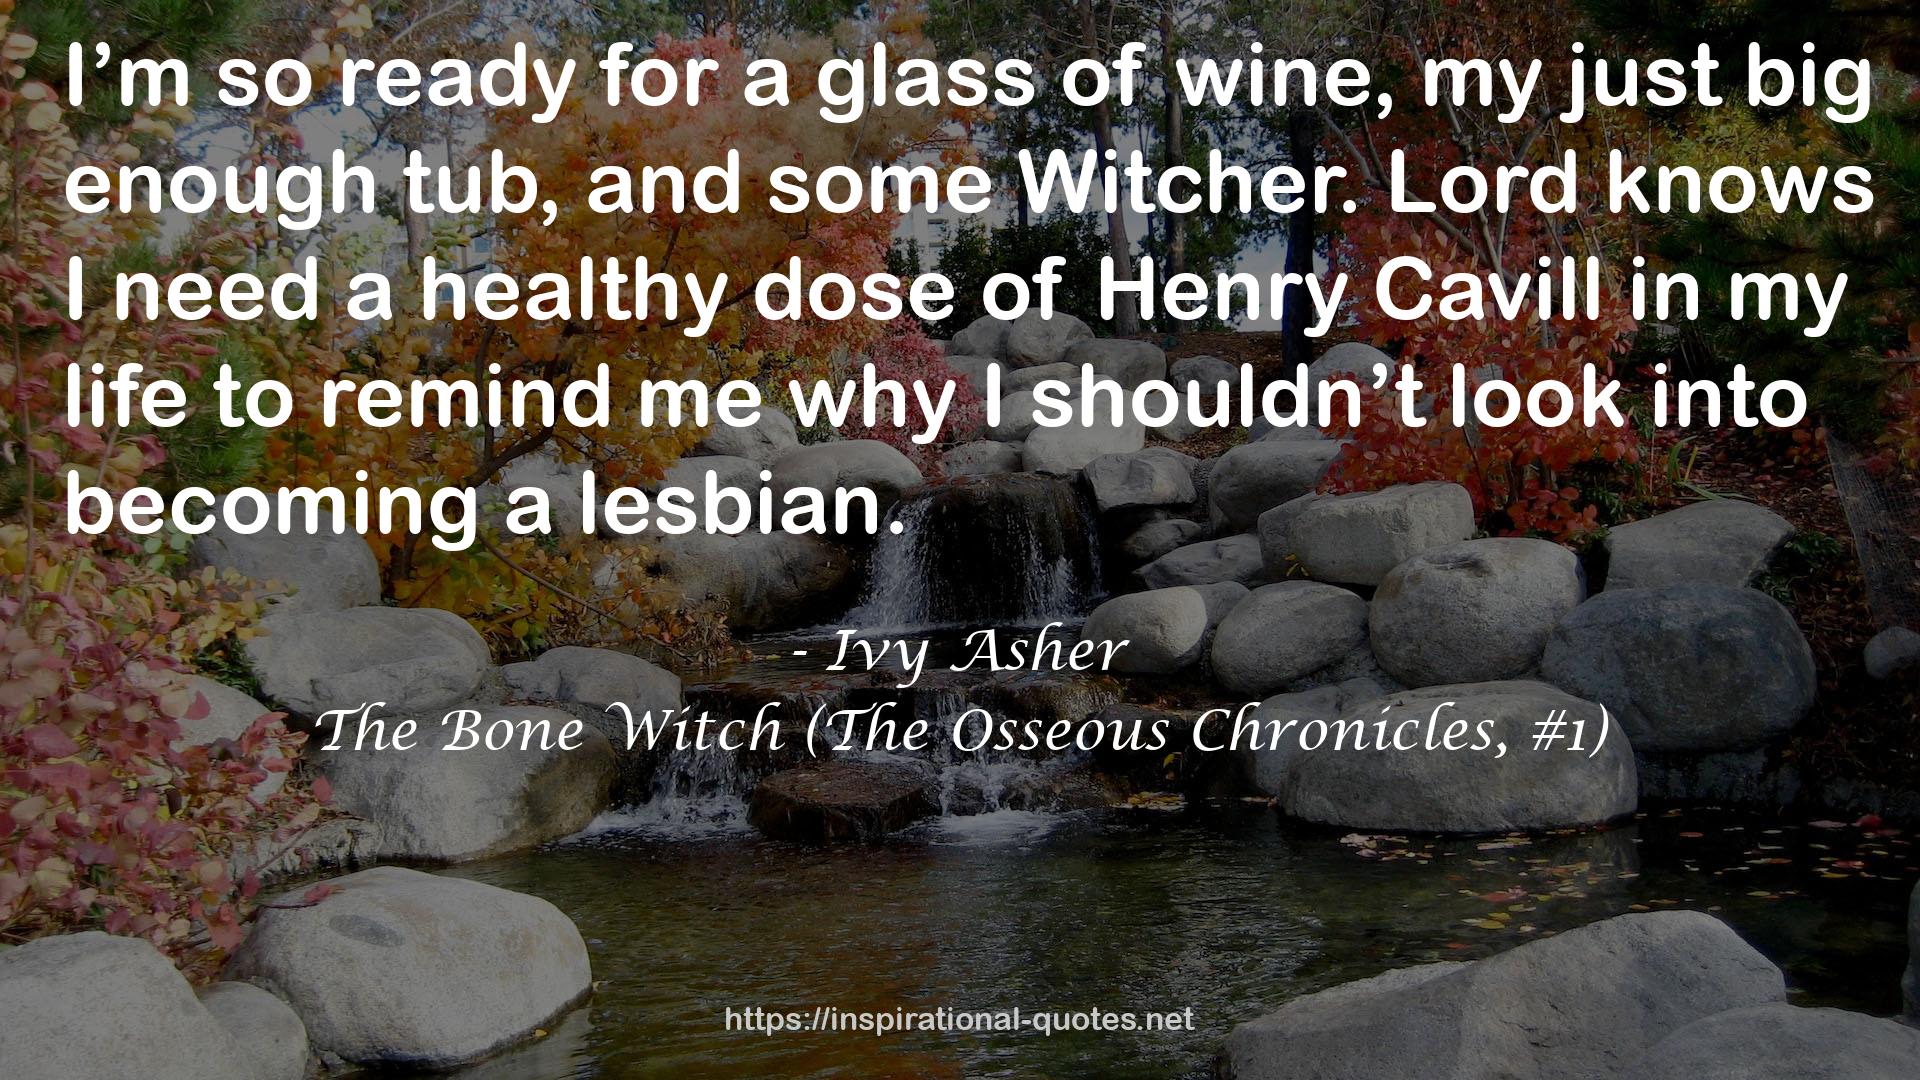 The Bone Witch (The Osseous Chronicles, #1) QUOTES